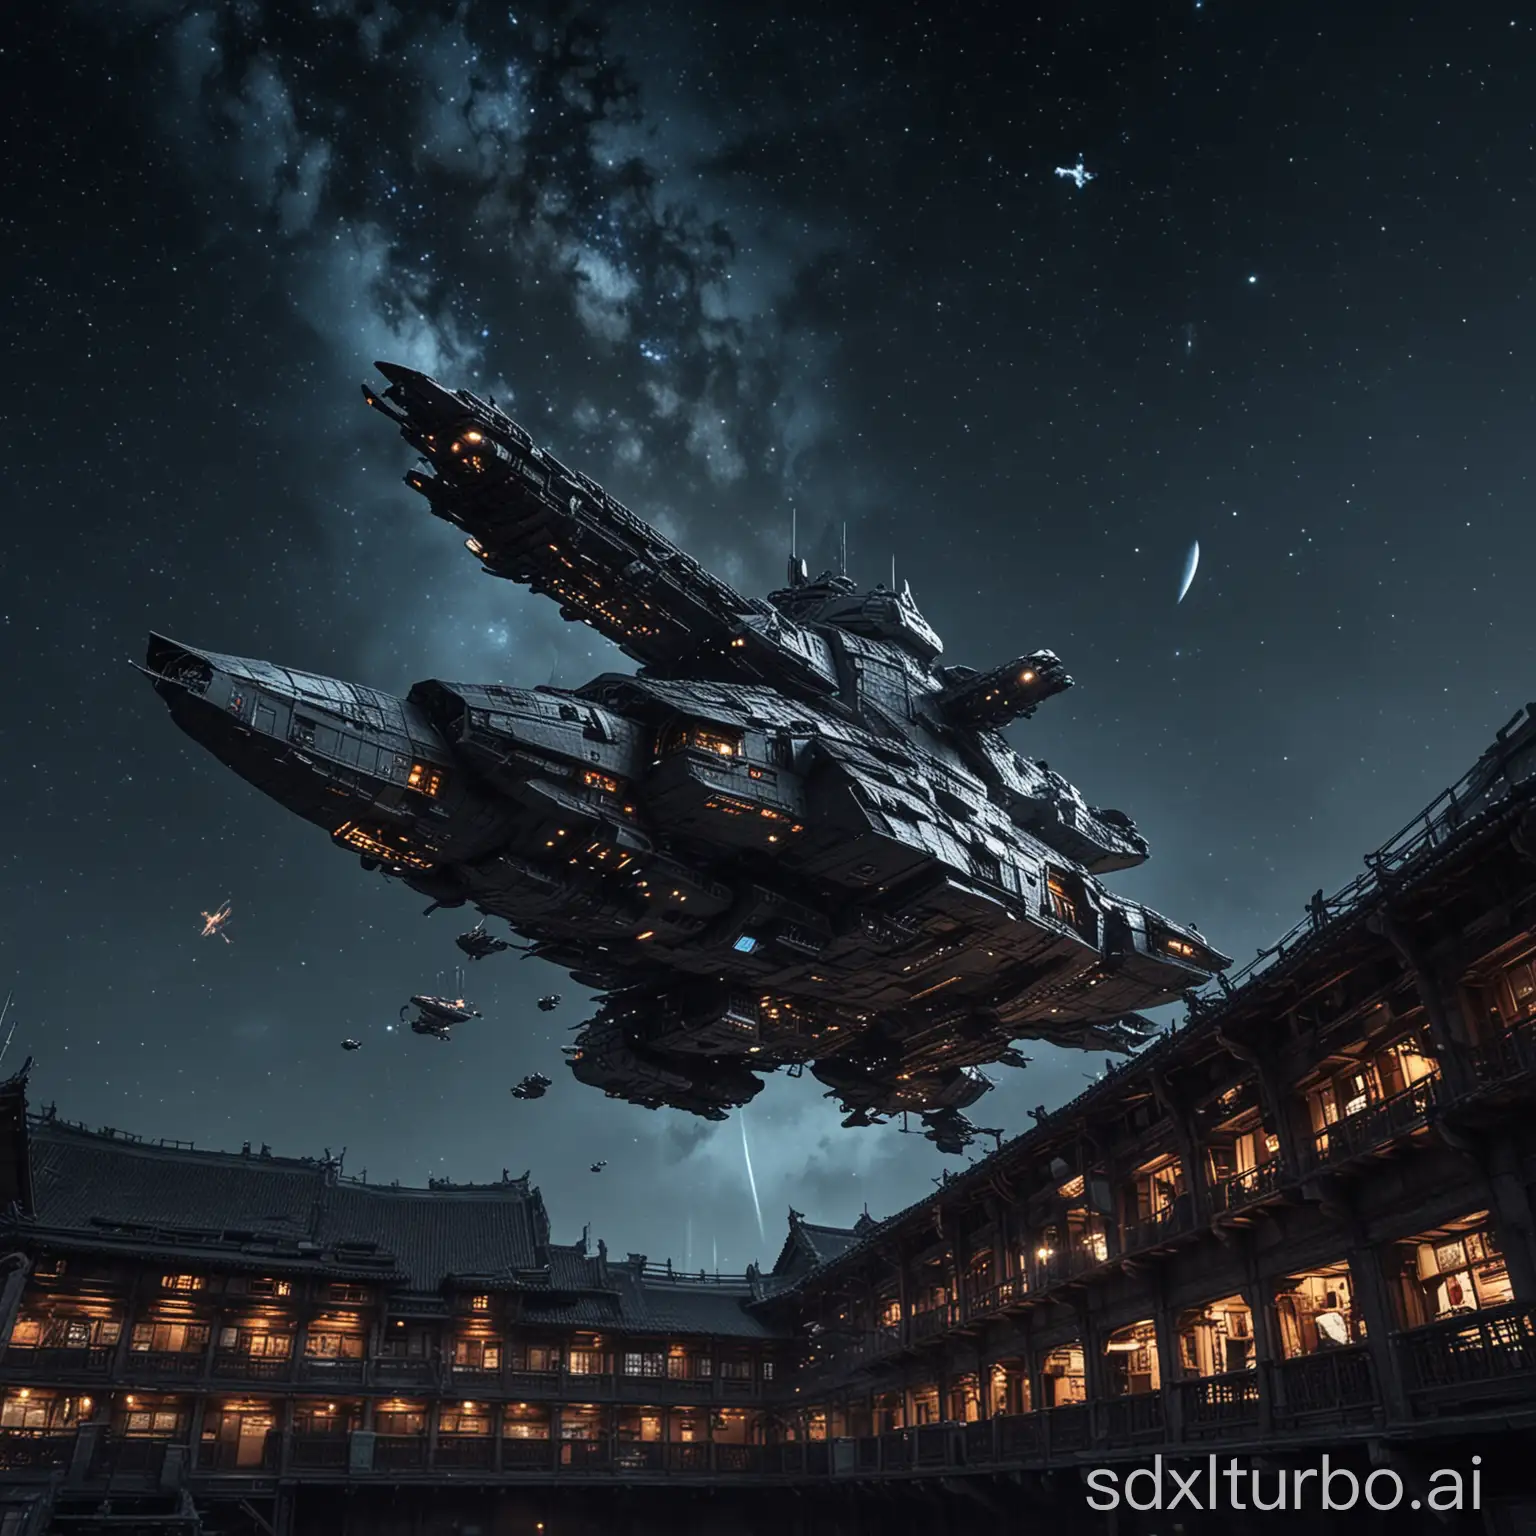 many spaceships of the universe warship fly over the night sky, under which there is a one-story  Minnan building with a courtyard, the building takes up half of the screen